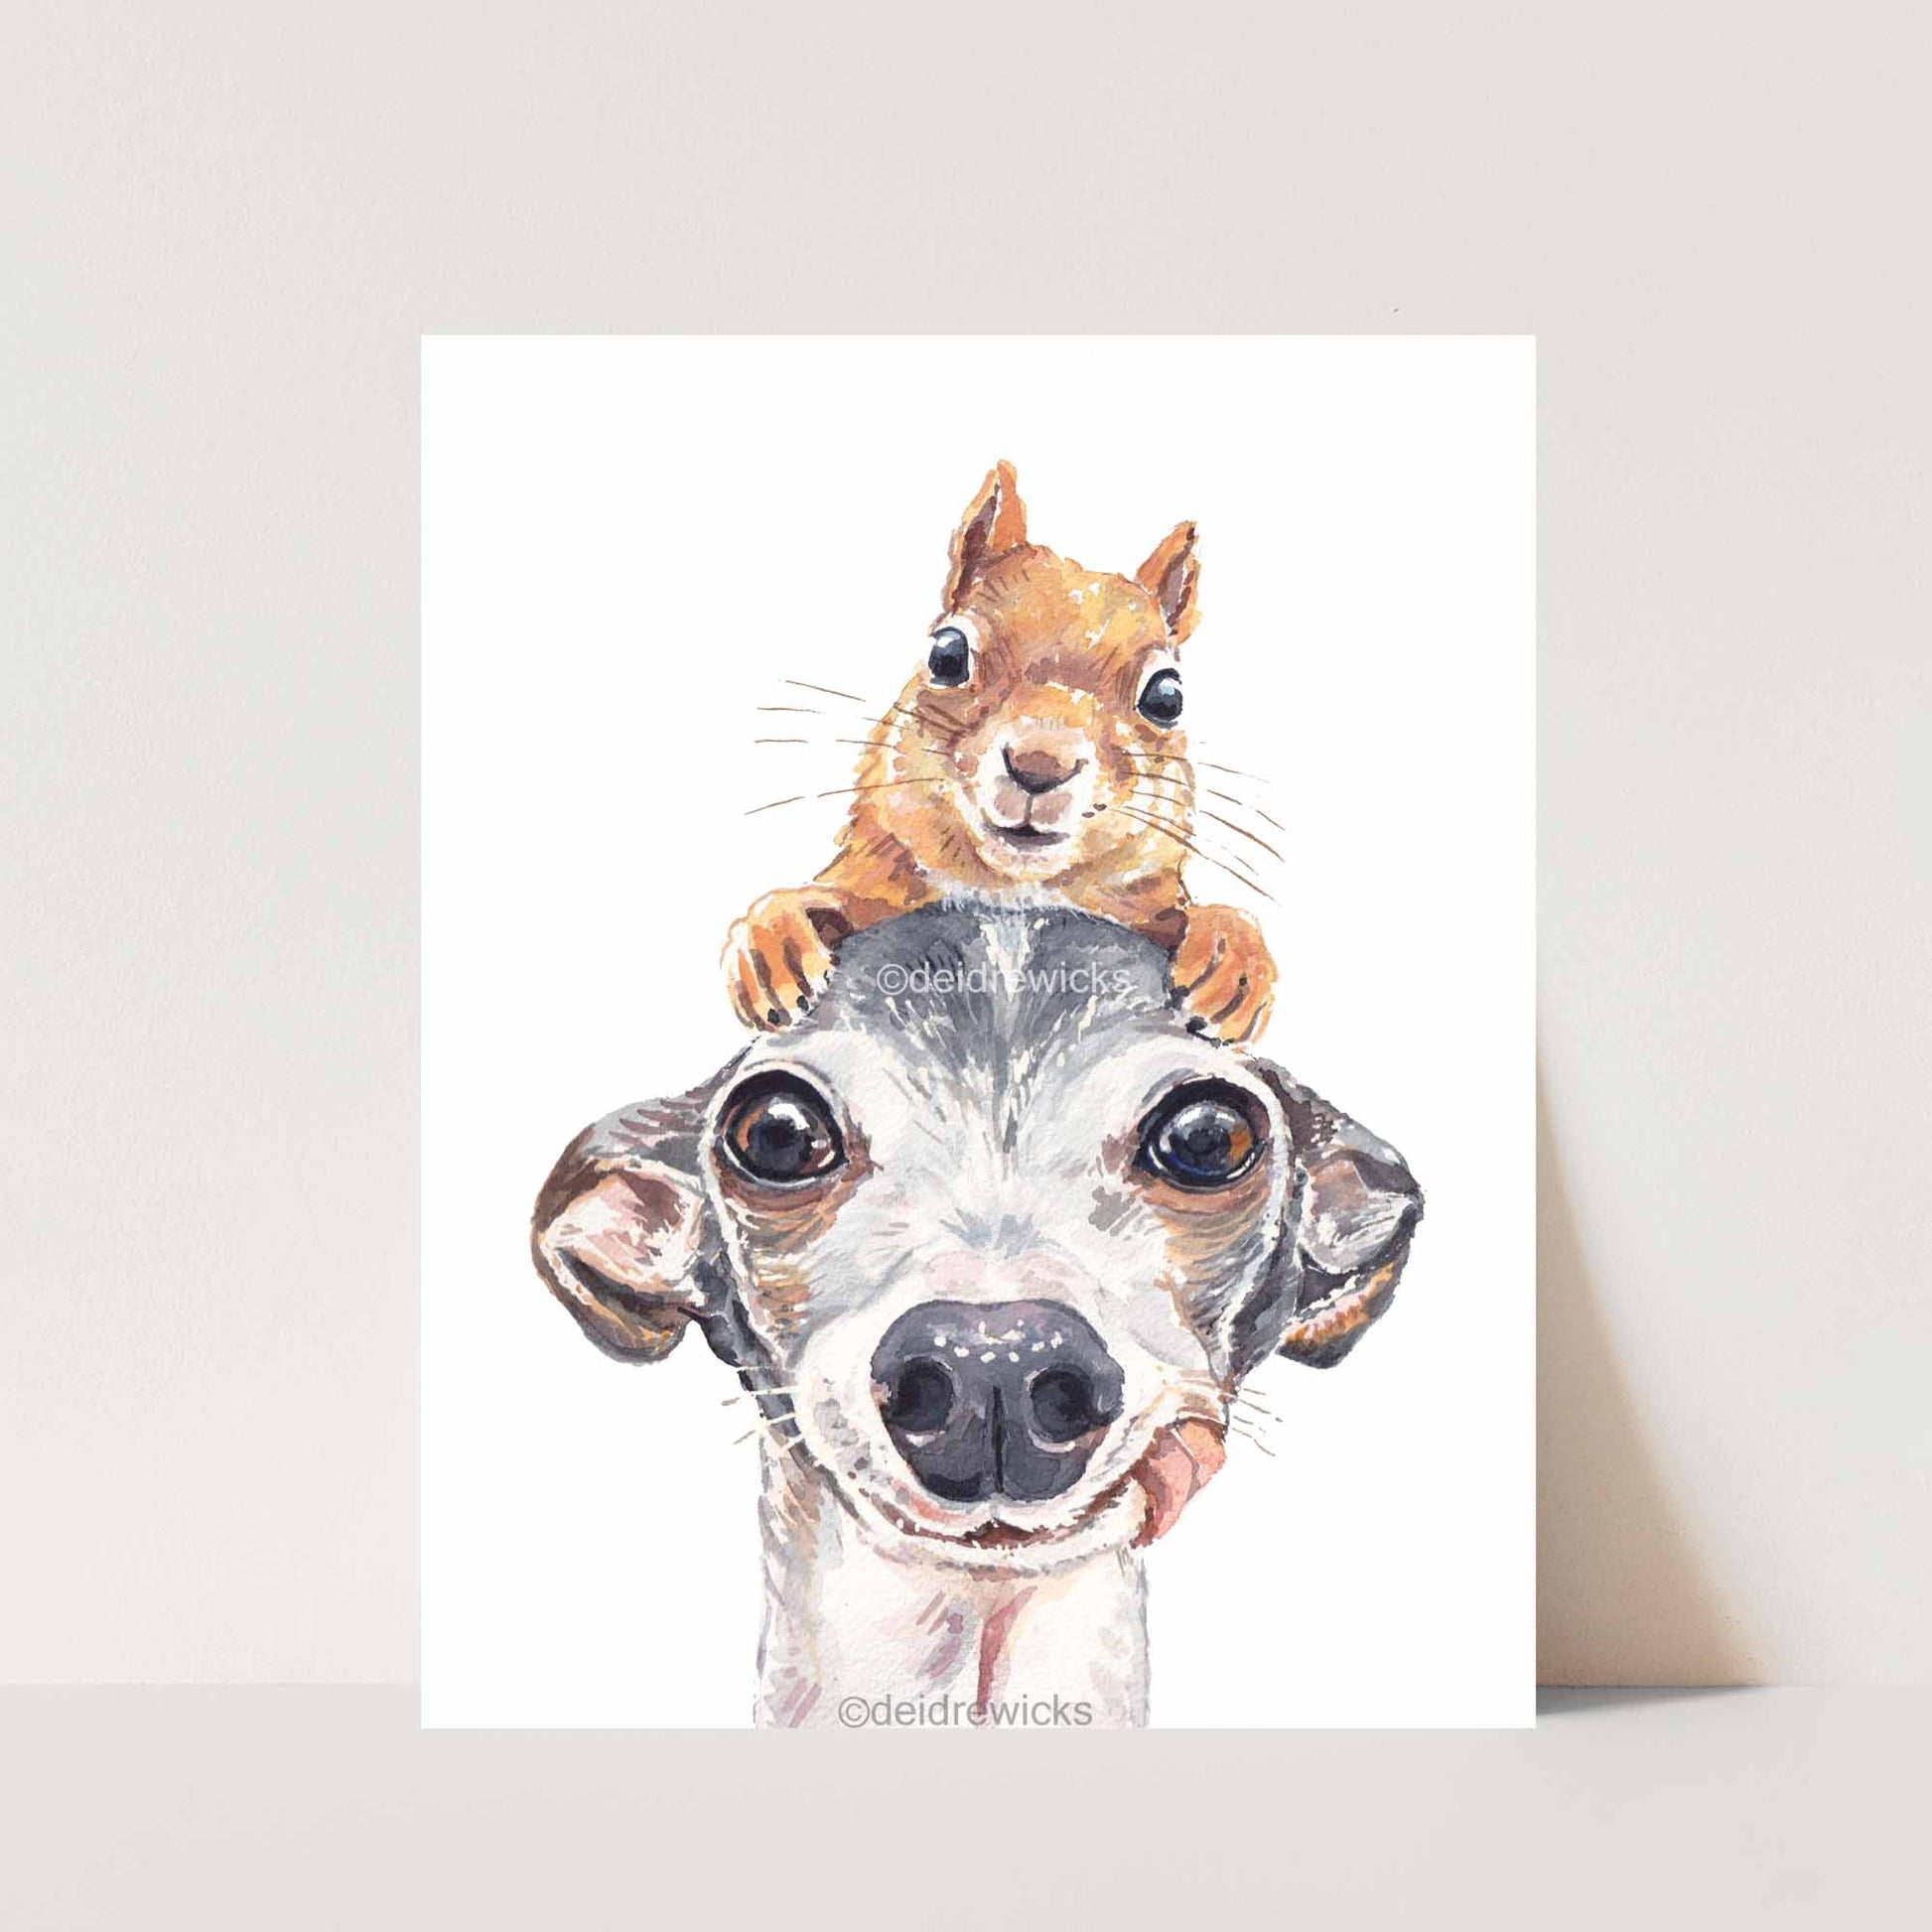 Watercolour painting of a red squirrel resting on top of the head of an Italian Greyhound dog. Art by Deidre Wicks